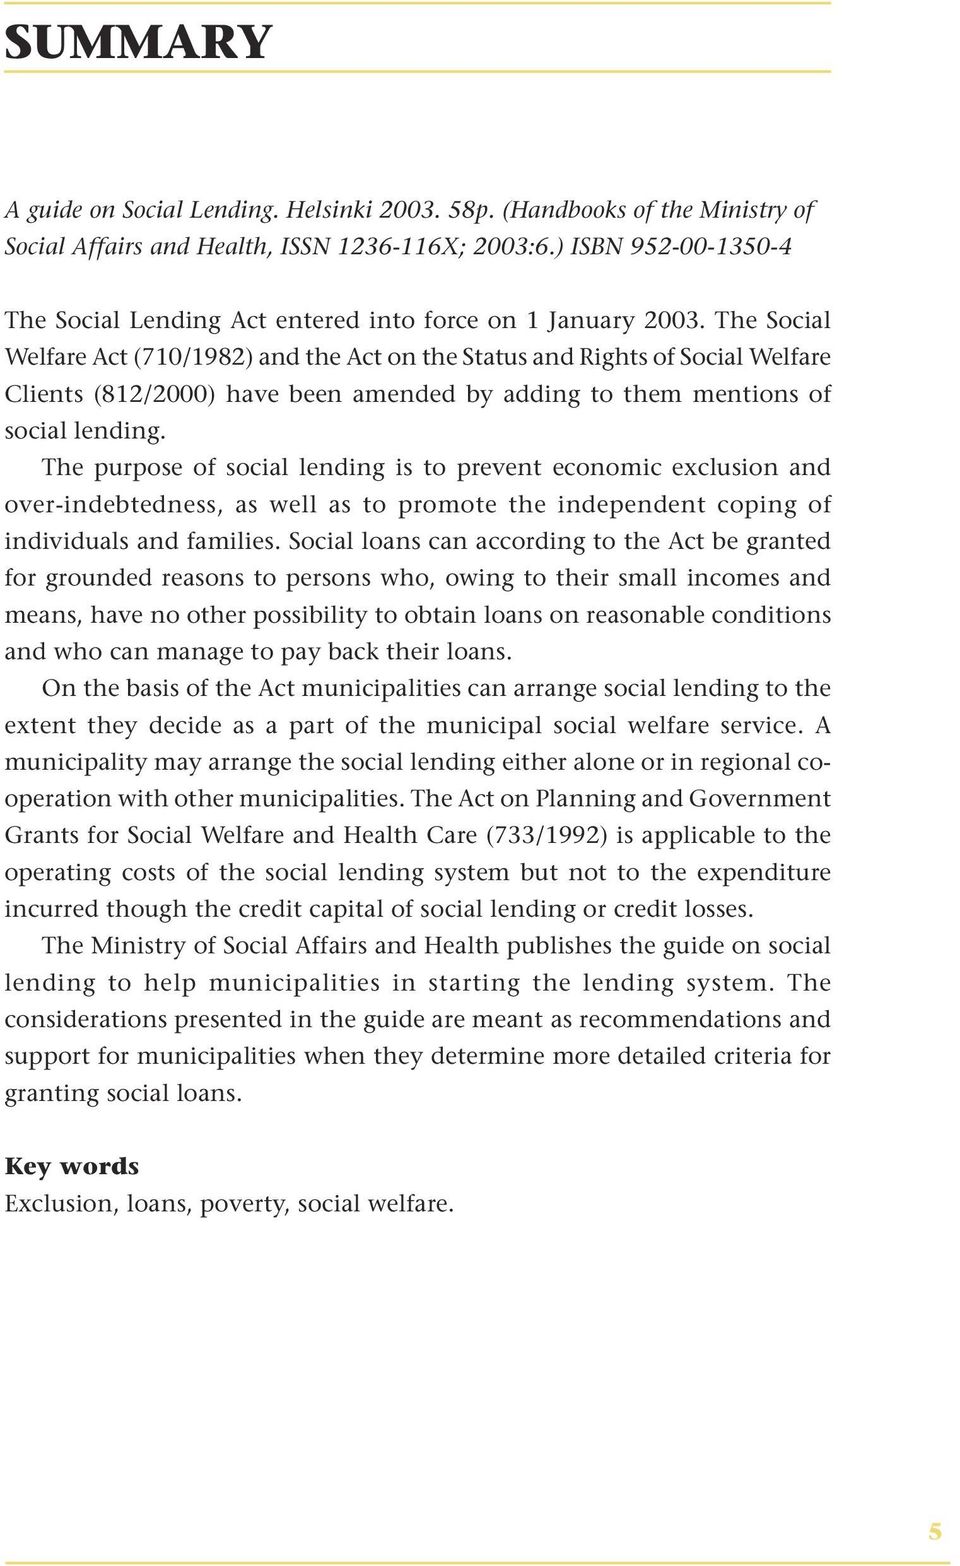 The Social Welfare Act (710/1982) and the Act on the Status and Rights of Social Welfare Clients (812/2000) have been amended by adding to them mentions of social lending.